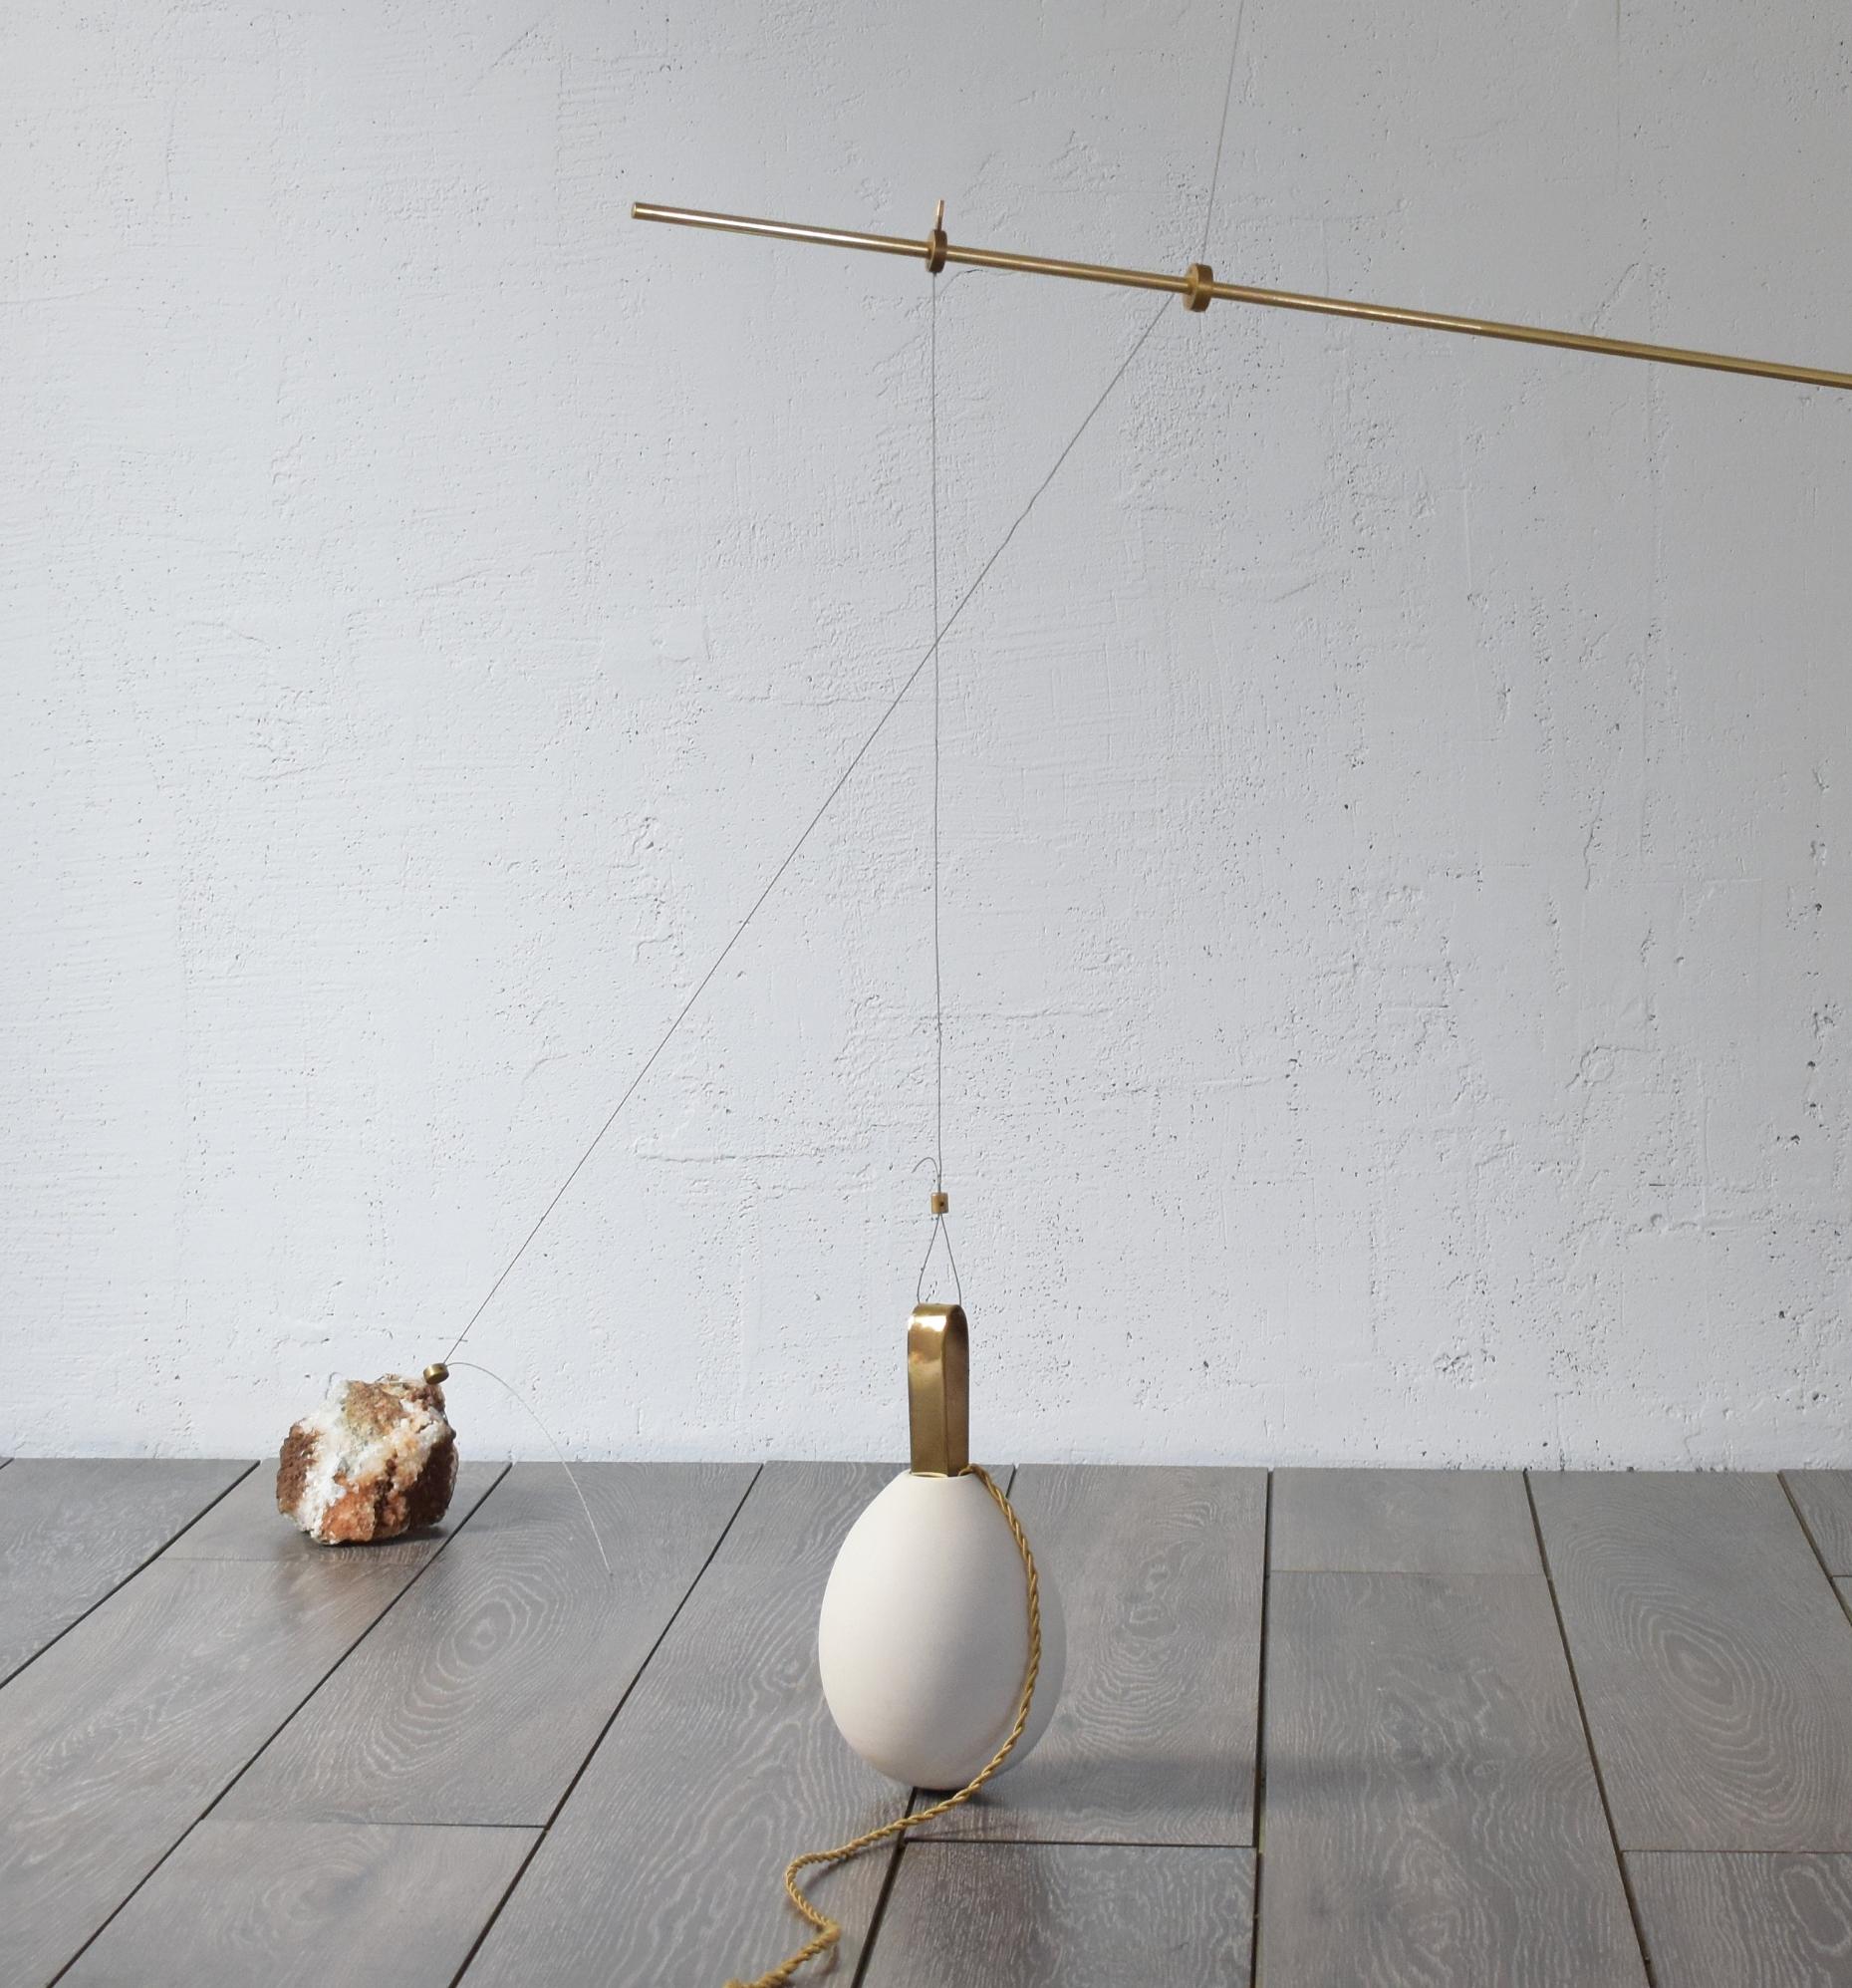 Sculpted lighting hatching eggs No 4 by Periclis Frementitis
Signed by Periclis Frementitis
Studio: HIGHDOTS
Dimensions: D 65 x W 130 x H 110 cm
Materials: Brass, raw stone, porcelain, G4 LED bulb.


Total drop length: